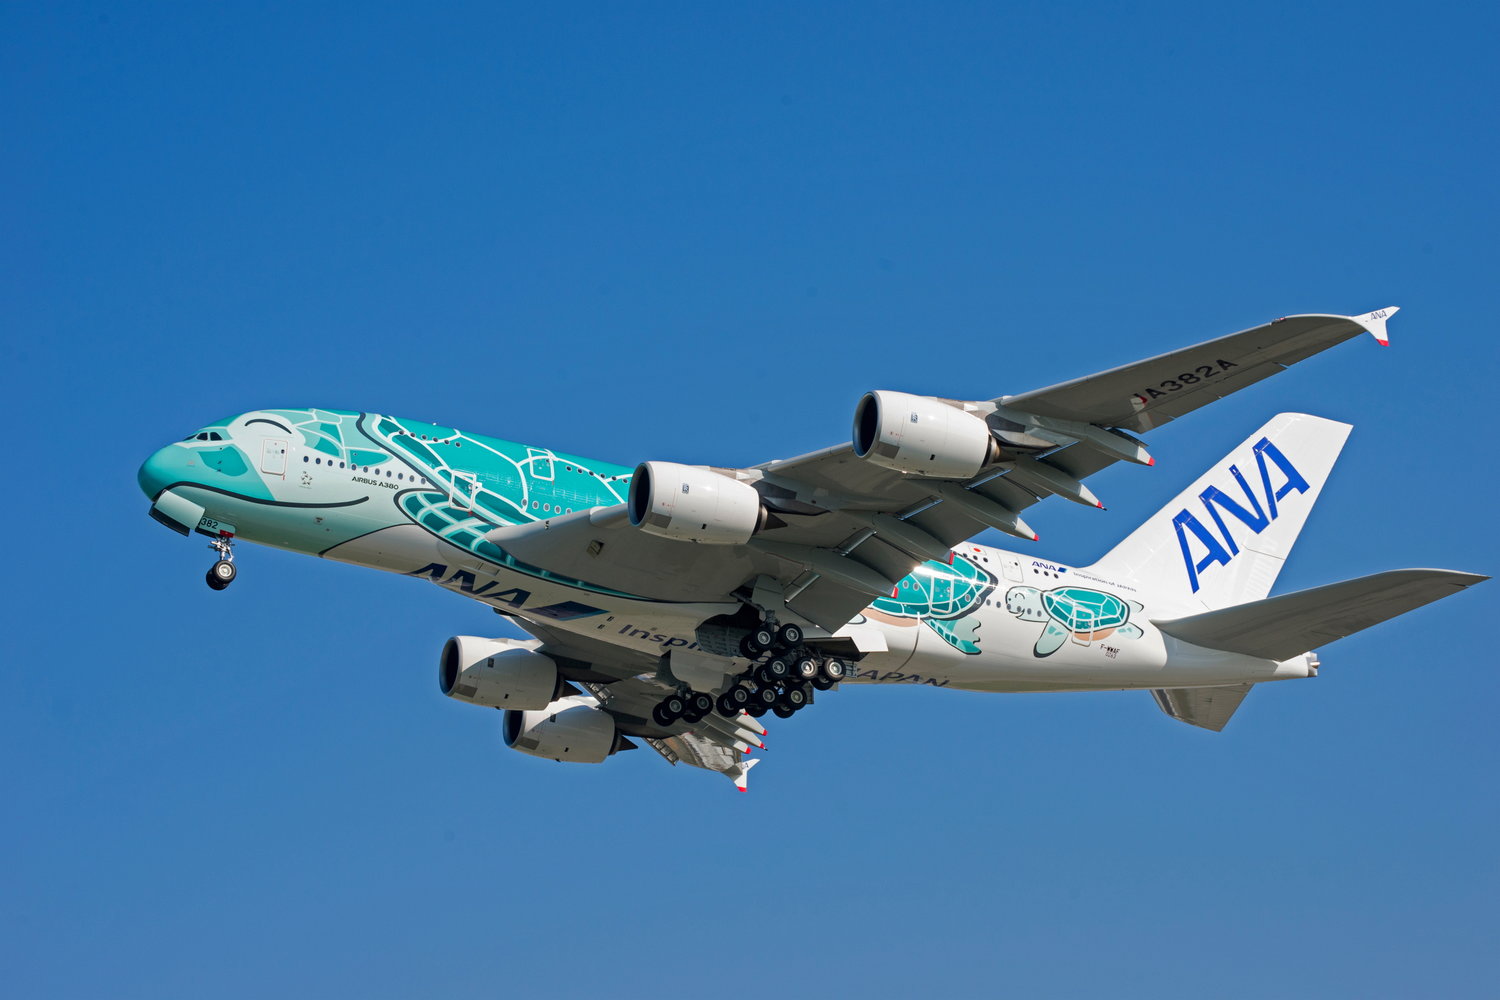 ANA gets second Flying Honu A380 — Allplane